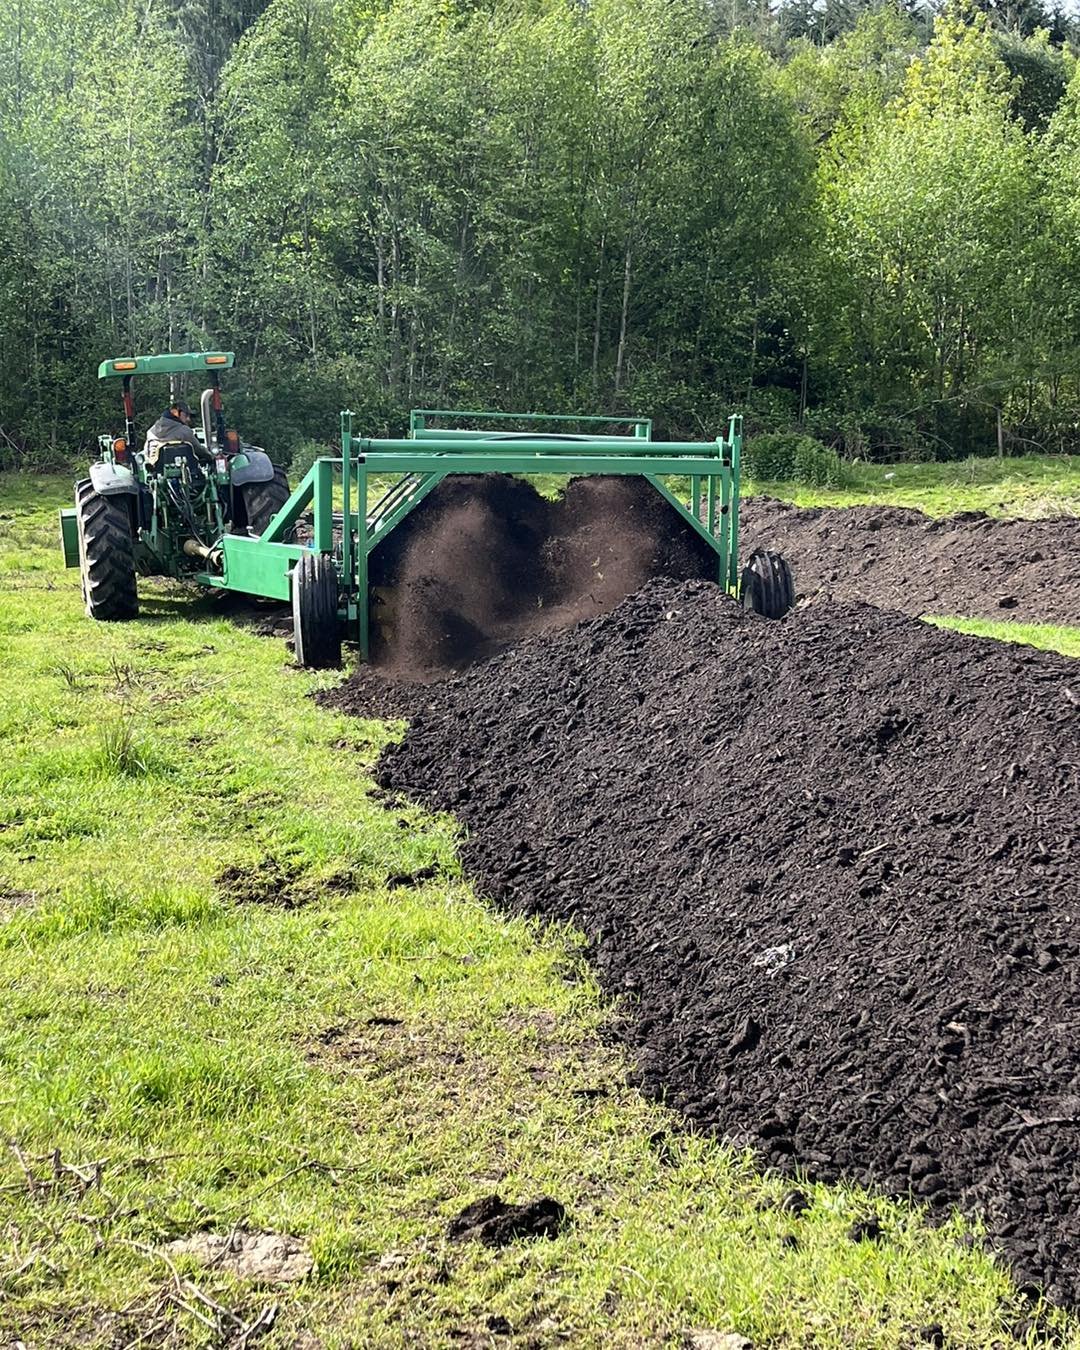 Trying out our new compost turner today, we got a little lucky to find this machine in a farm auction recently, after wanting one for a number of years. 

Our goal is to utilize this machine to mix our cow bedding with chicken and cattle manure to ma